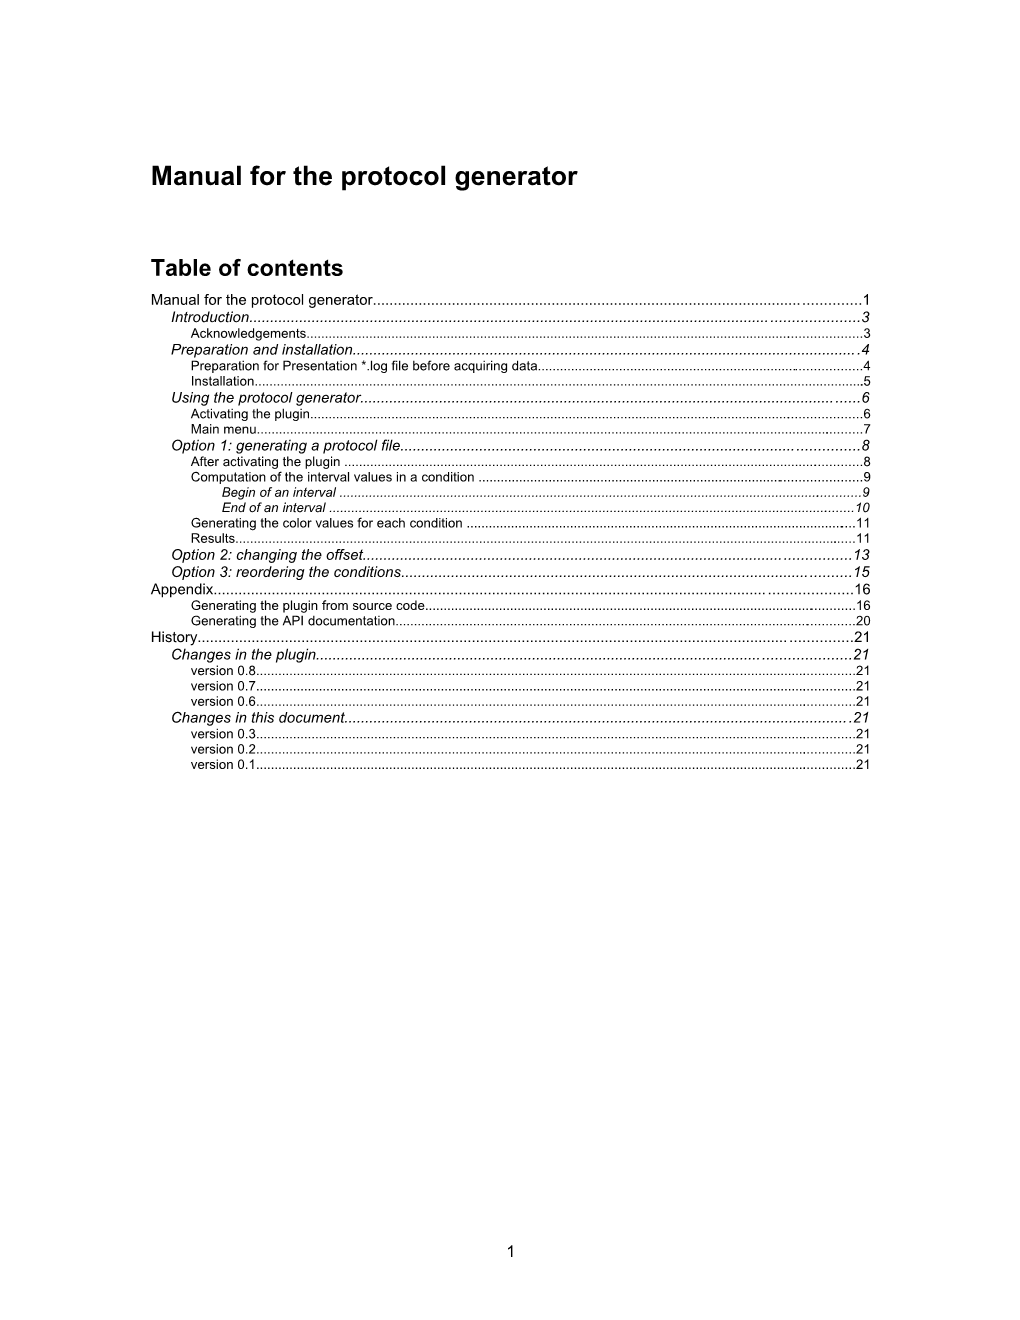 Use of the Protocol Generator